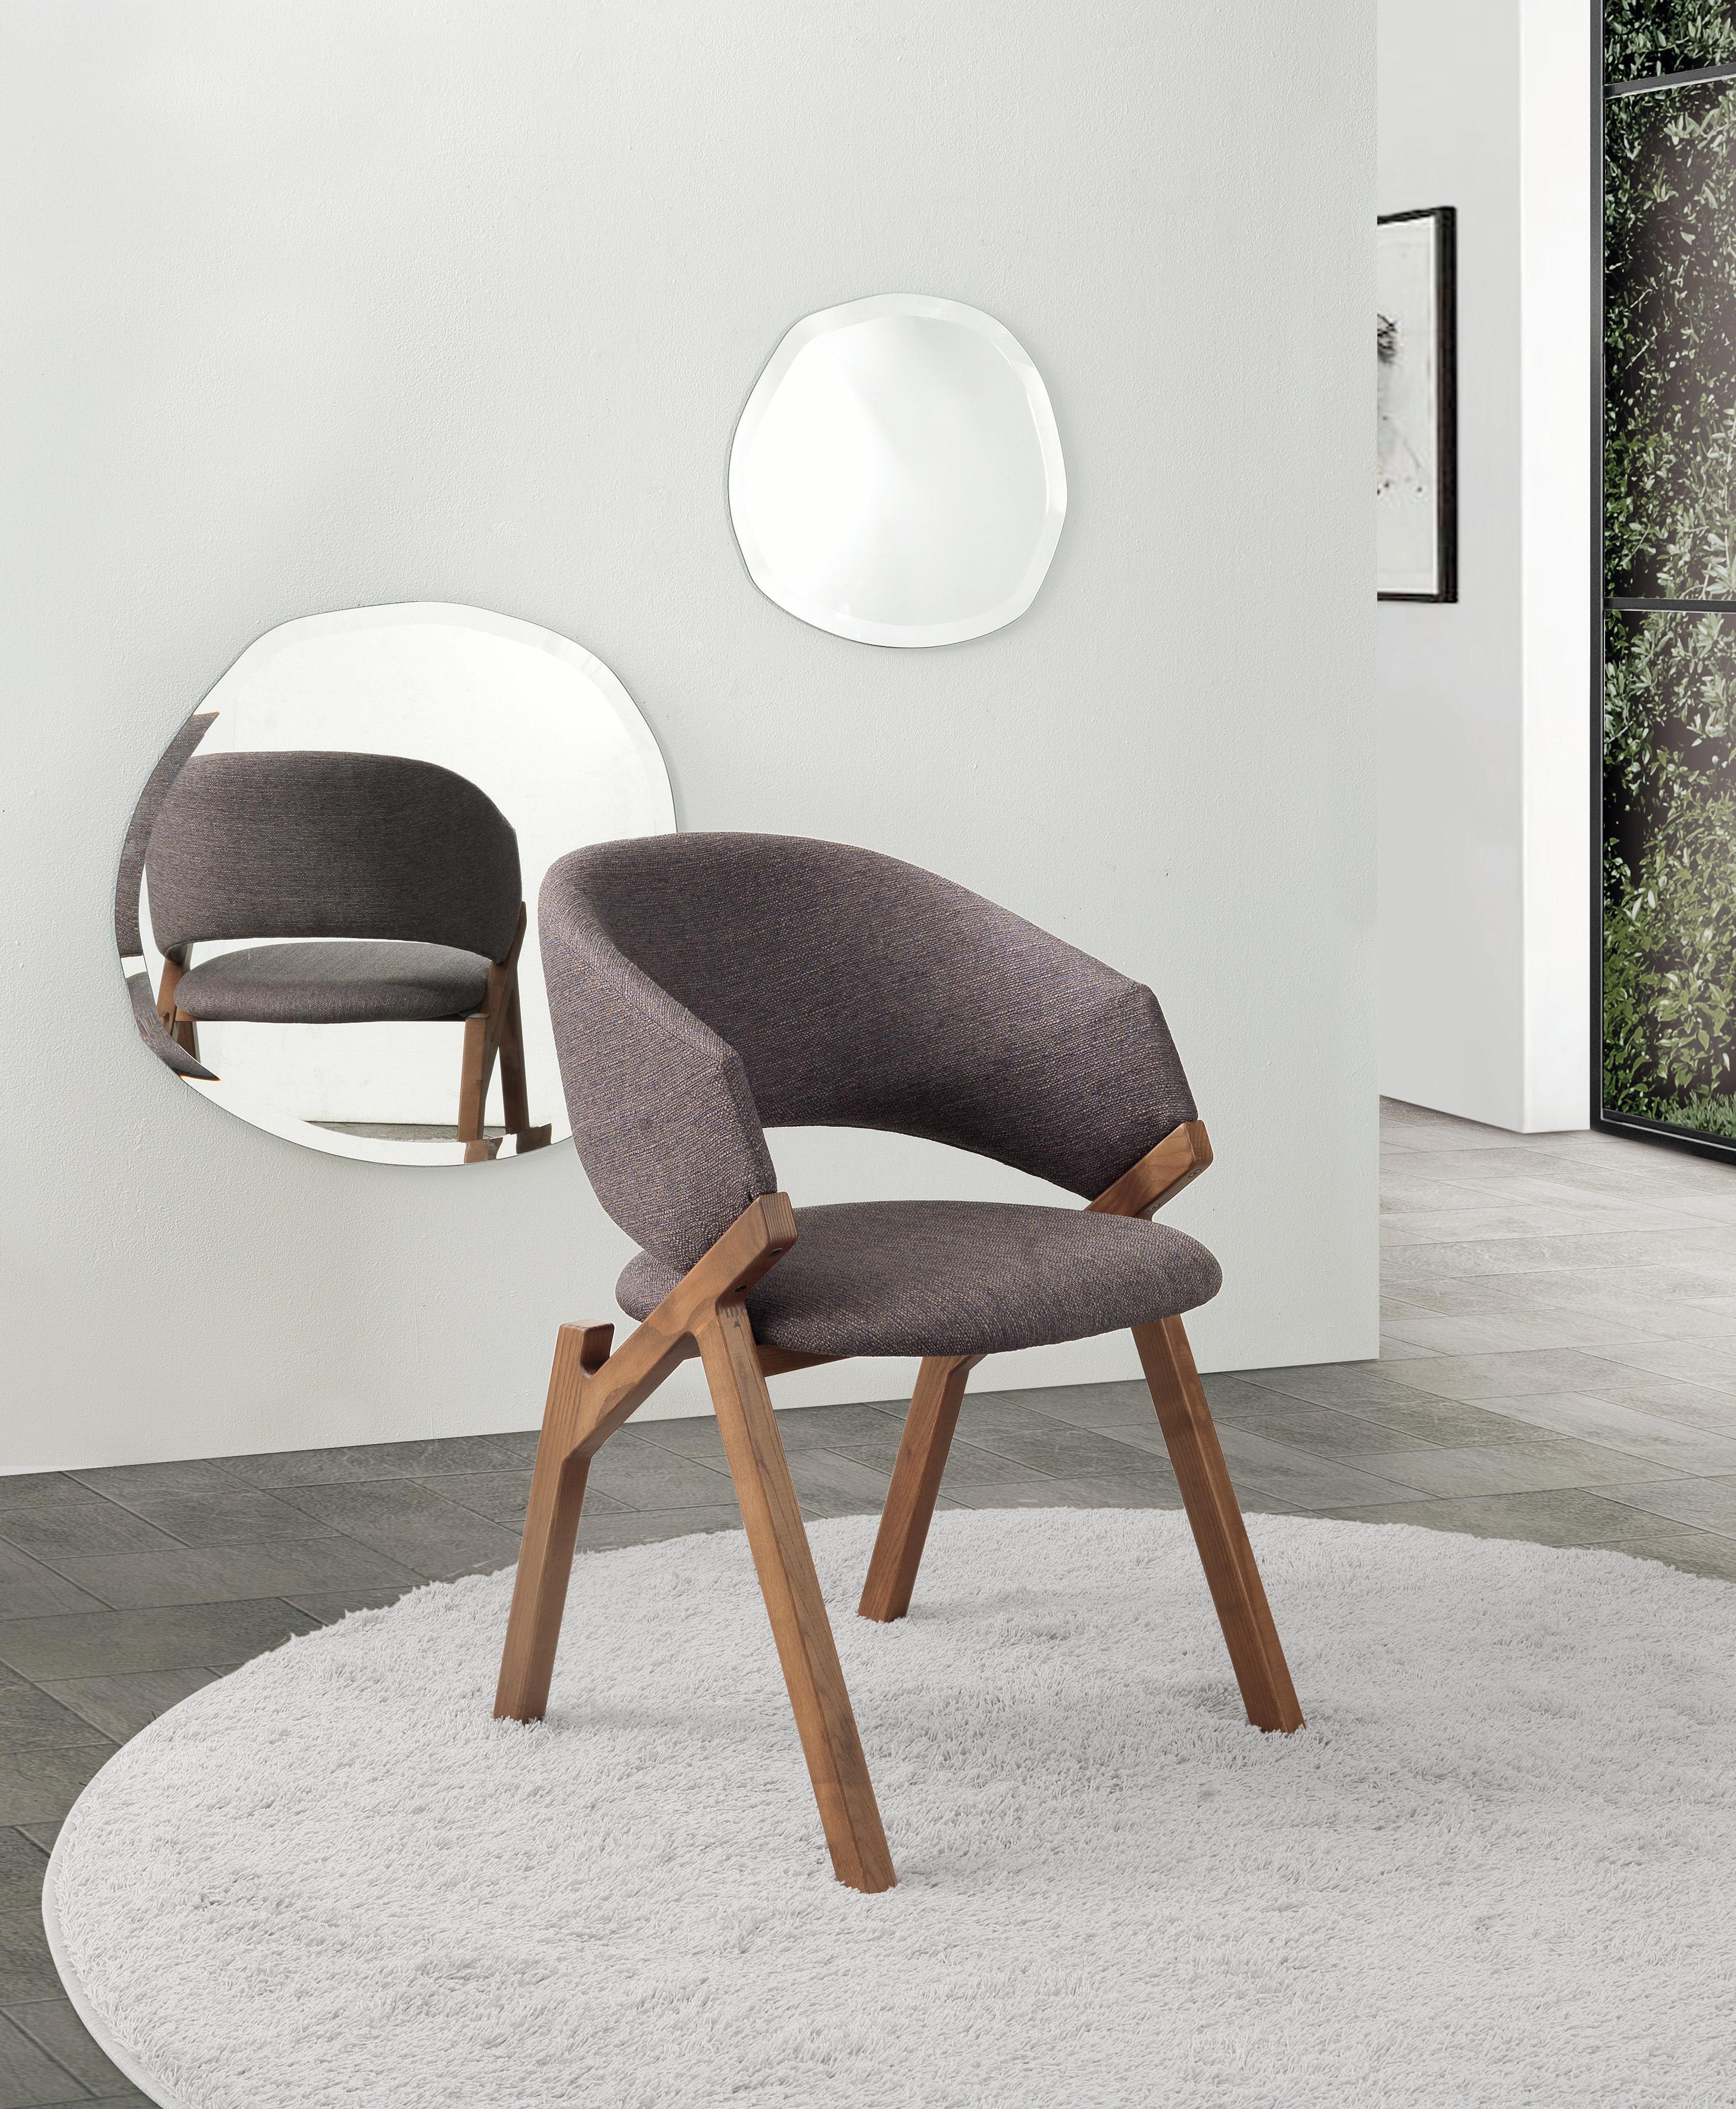 Chair with structure in solid ash. Seat and curved backrest covered in leather, eco-leather or fabric of the collection. Available finishings: WG wengé, NC ash stained walnut, TB ash stained tobacco, TN ash stained black, open pore matte lacquered